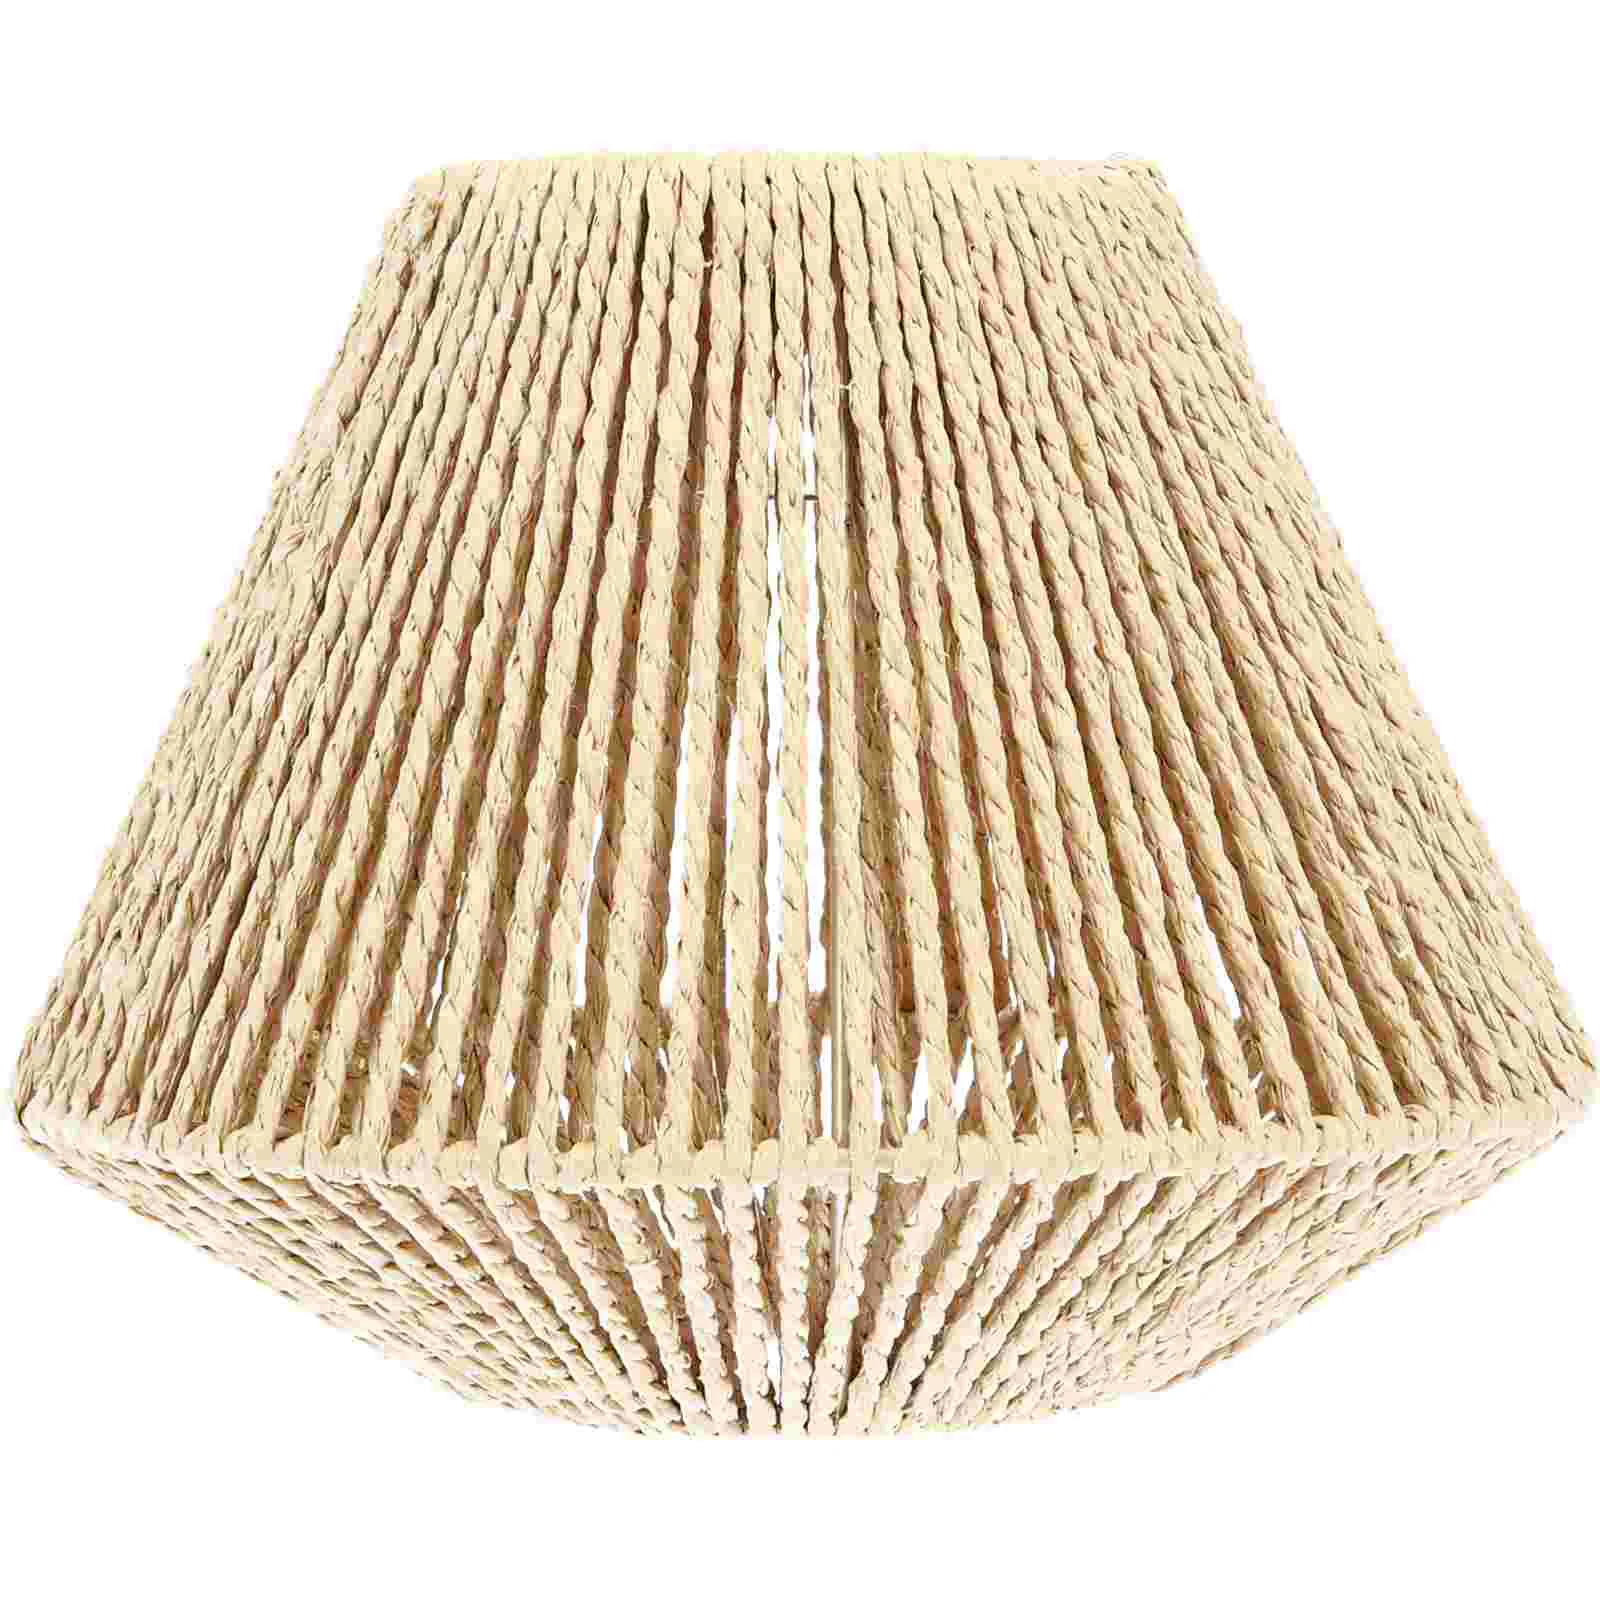 

Straw Woven Lampshade Hanging Lamp Cover Rustic Lamp Shade for Home Hotel Restaurant Braided Vintage Lampshade